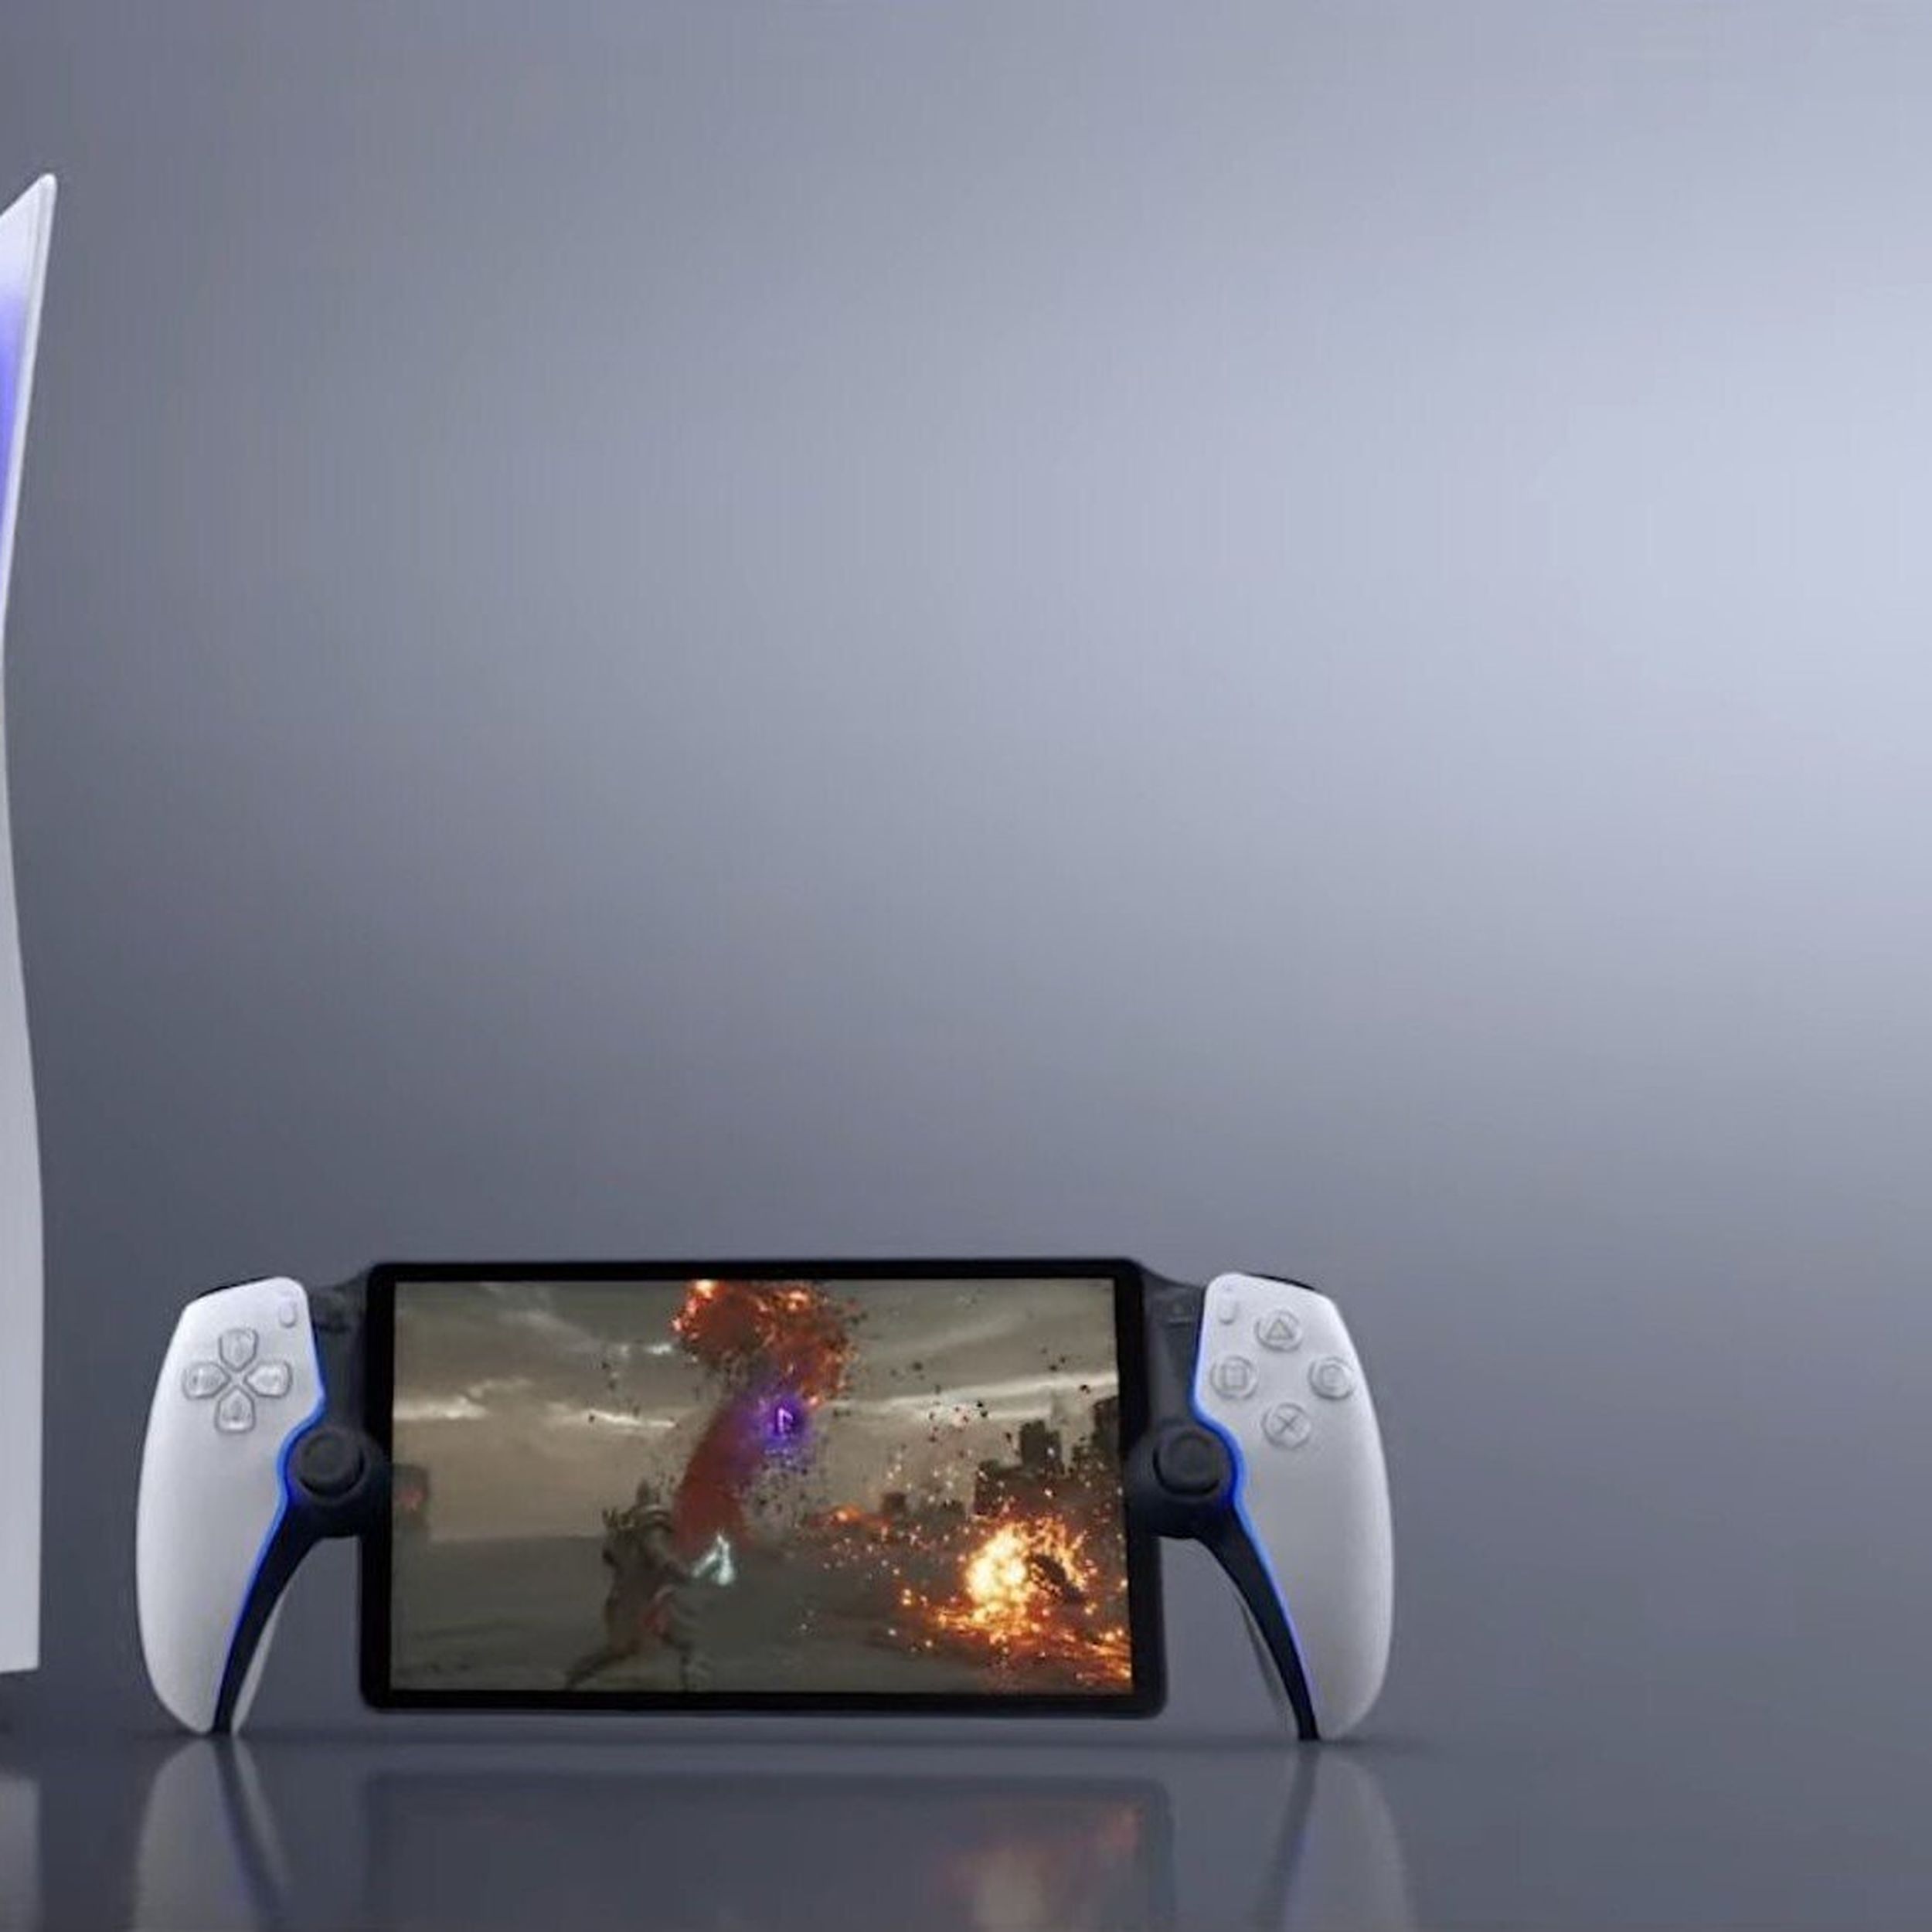 PlayStation to release a new streaming handheld Project Q